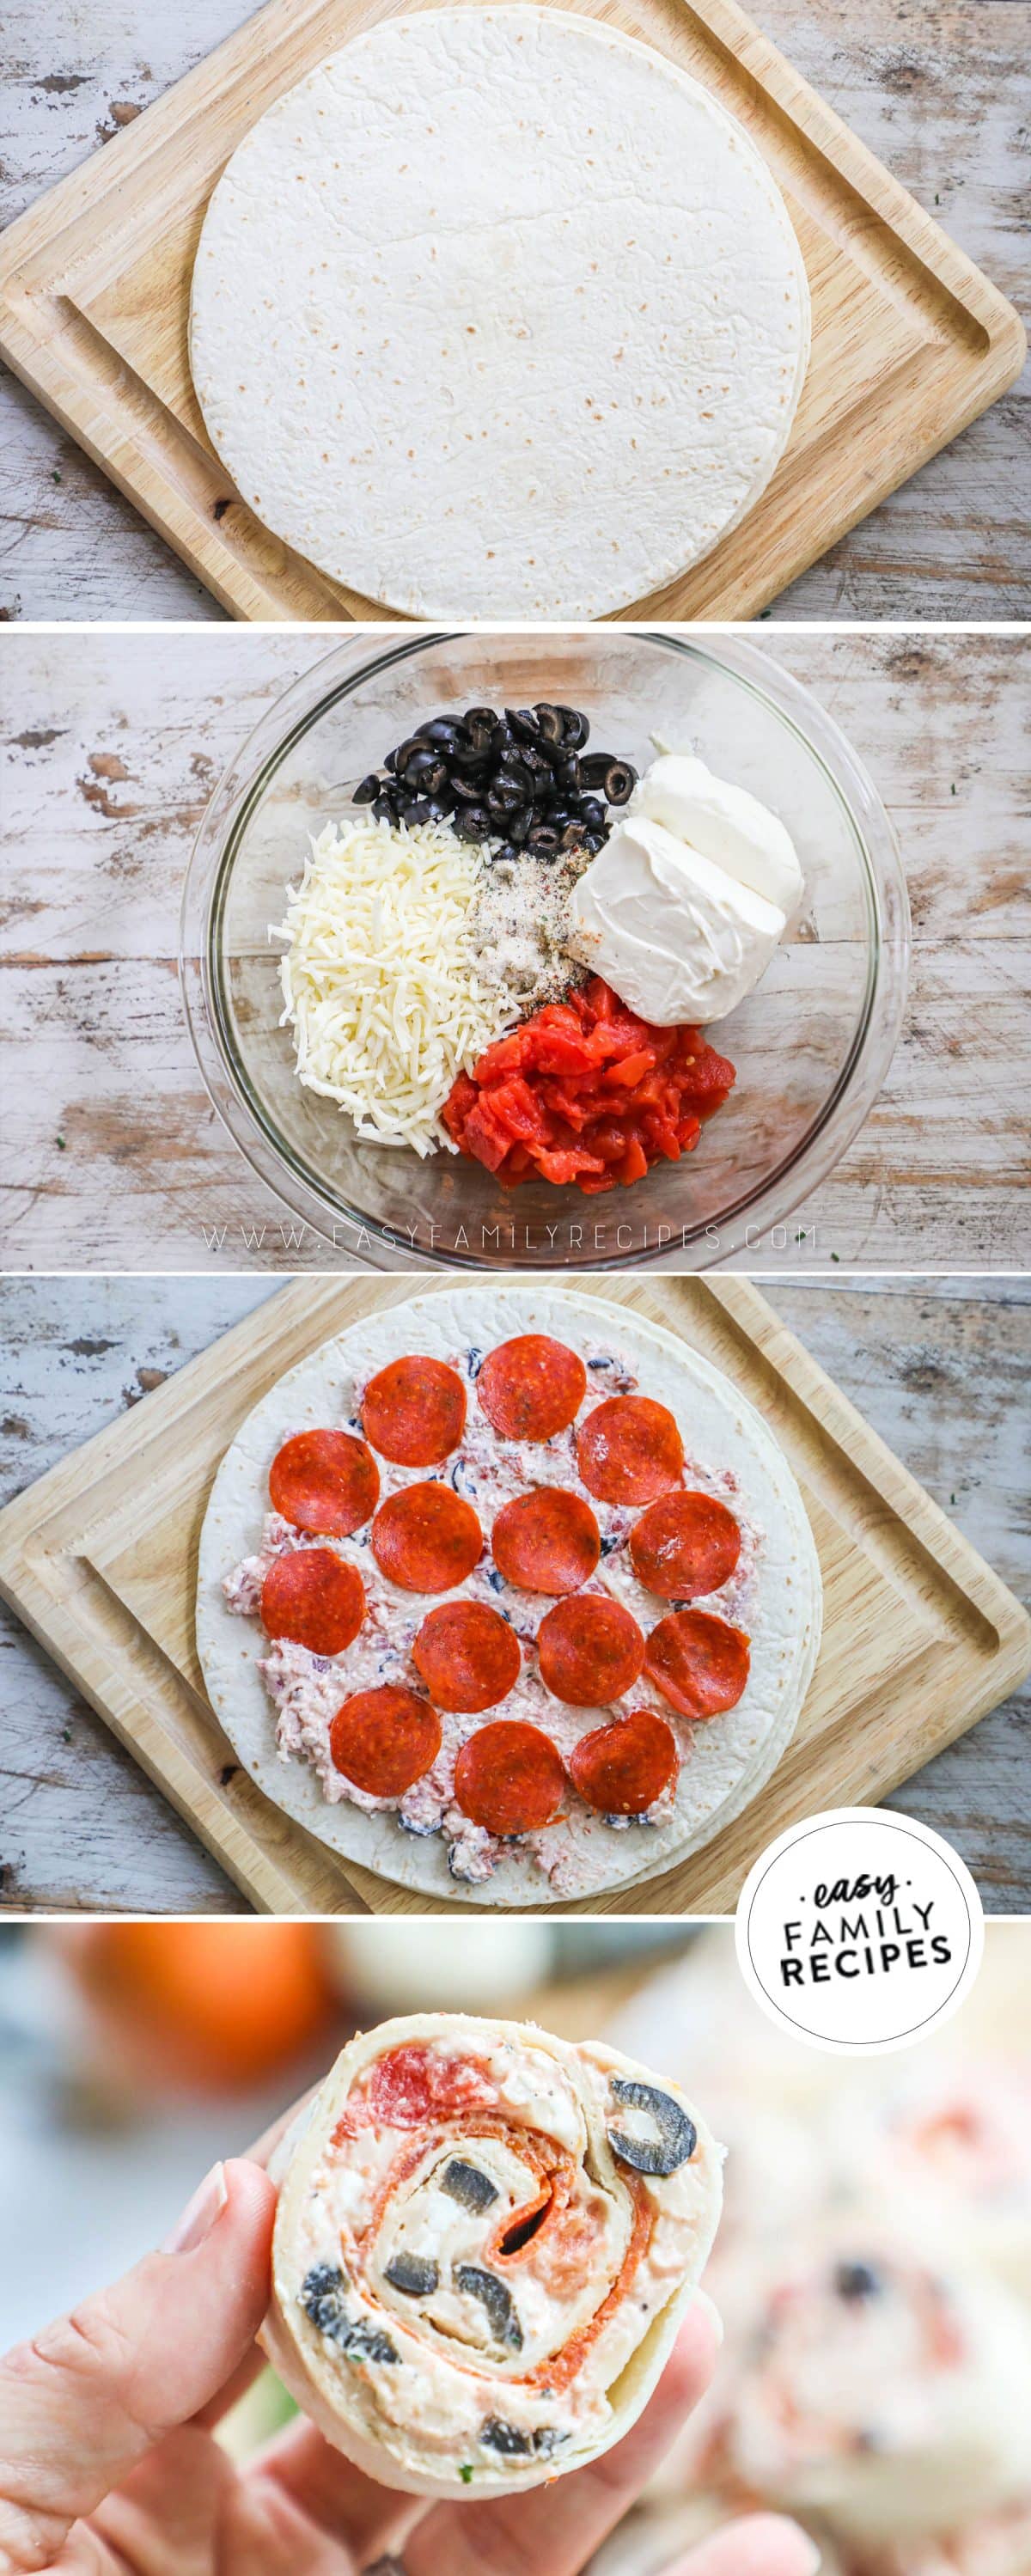 Steps to make pepperoni pinwheels step 1 lay out tortillas step 2 mix cream cheese and other filling ingredients except pepperoni step 3 spread onto tortilla with pepperoni step 4 roll up and cut.